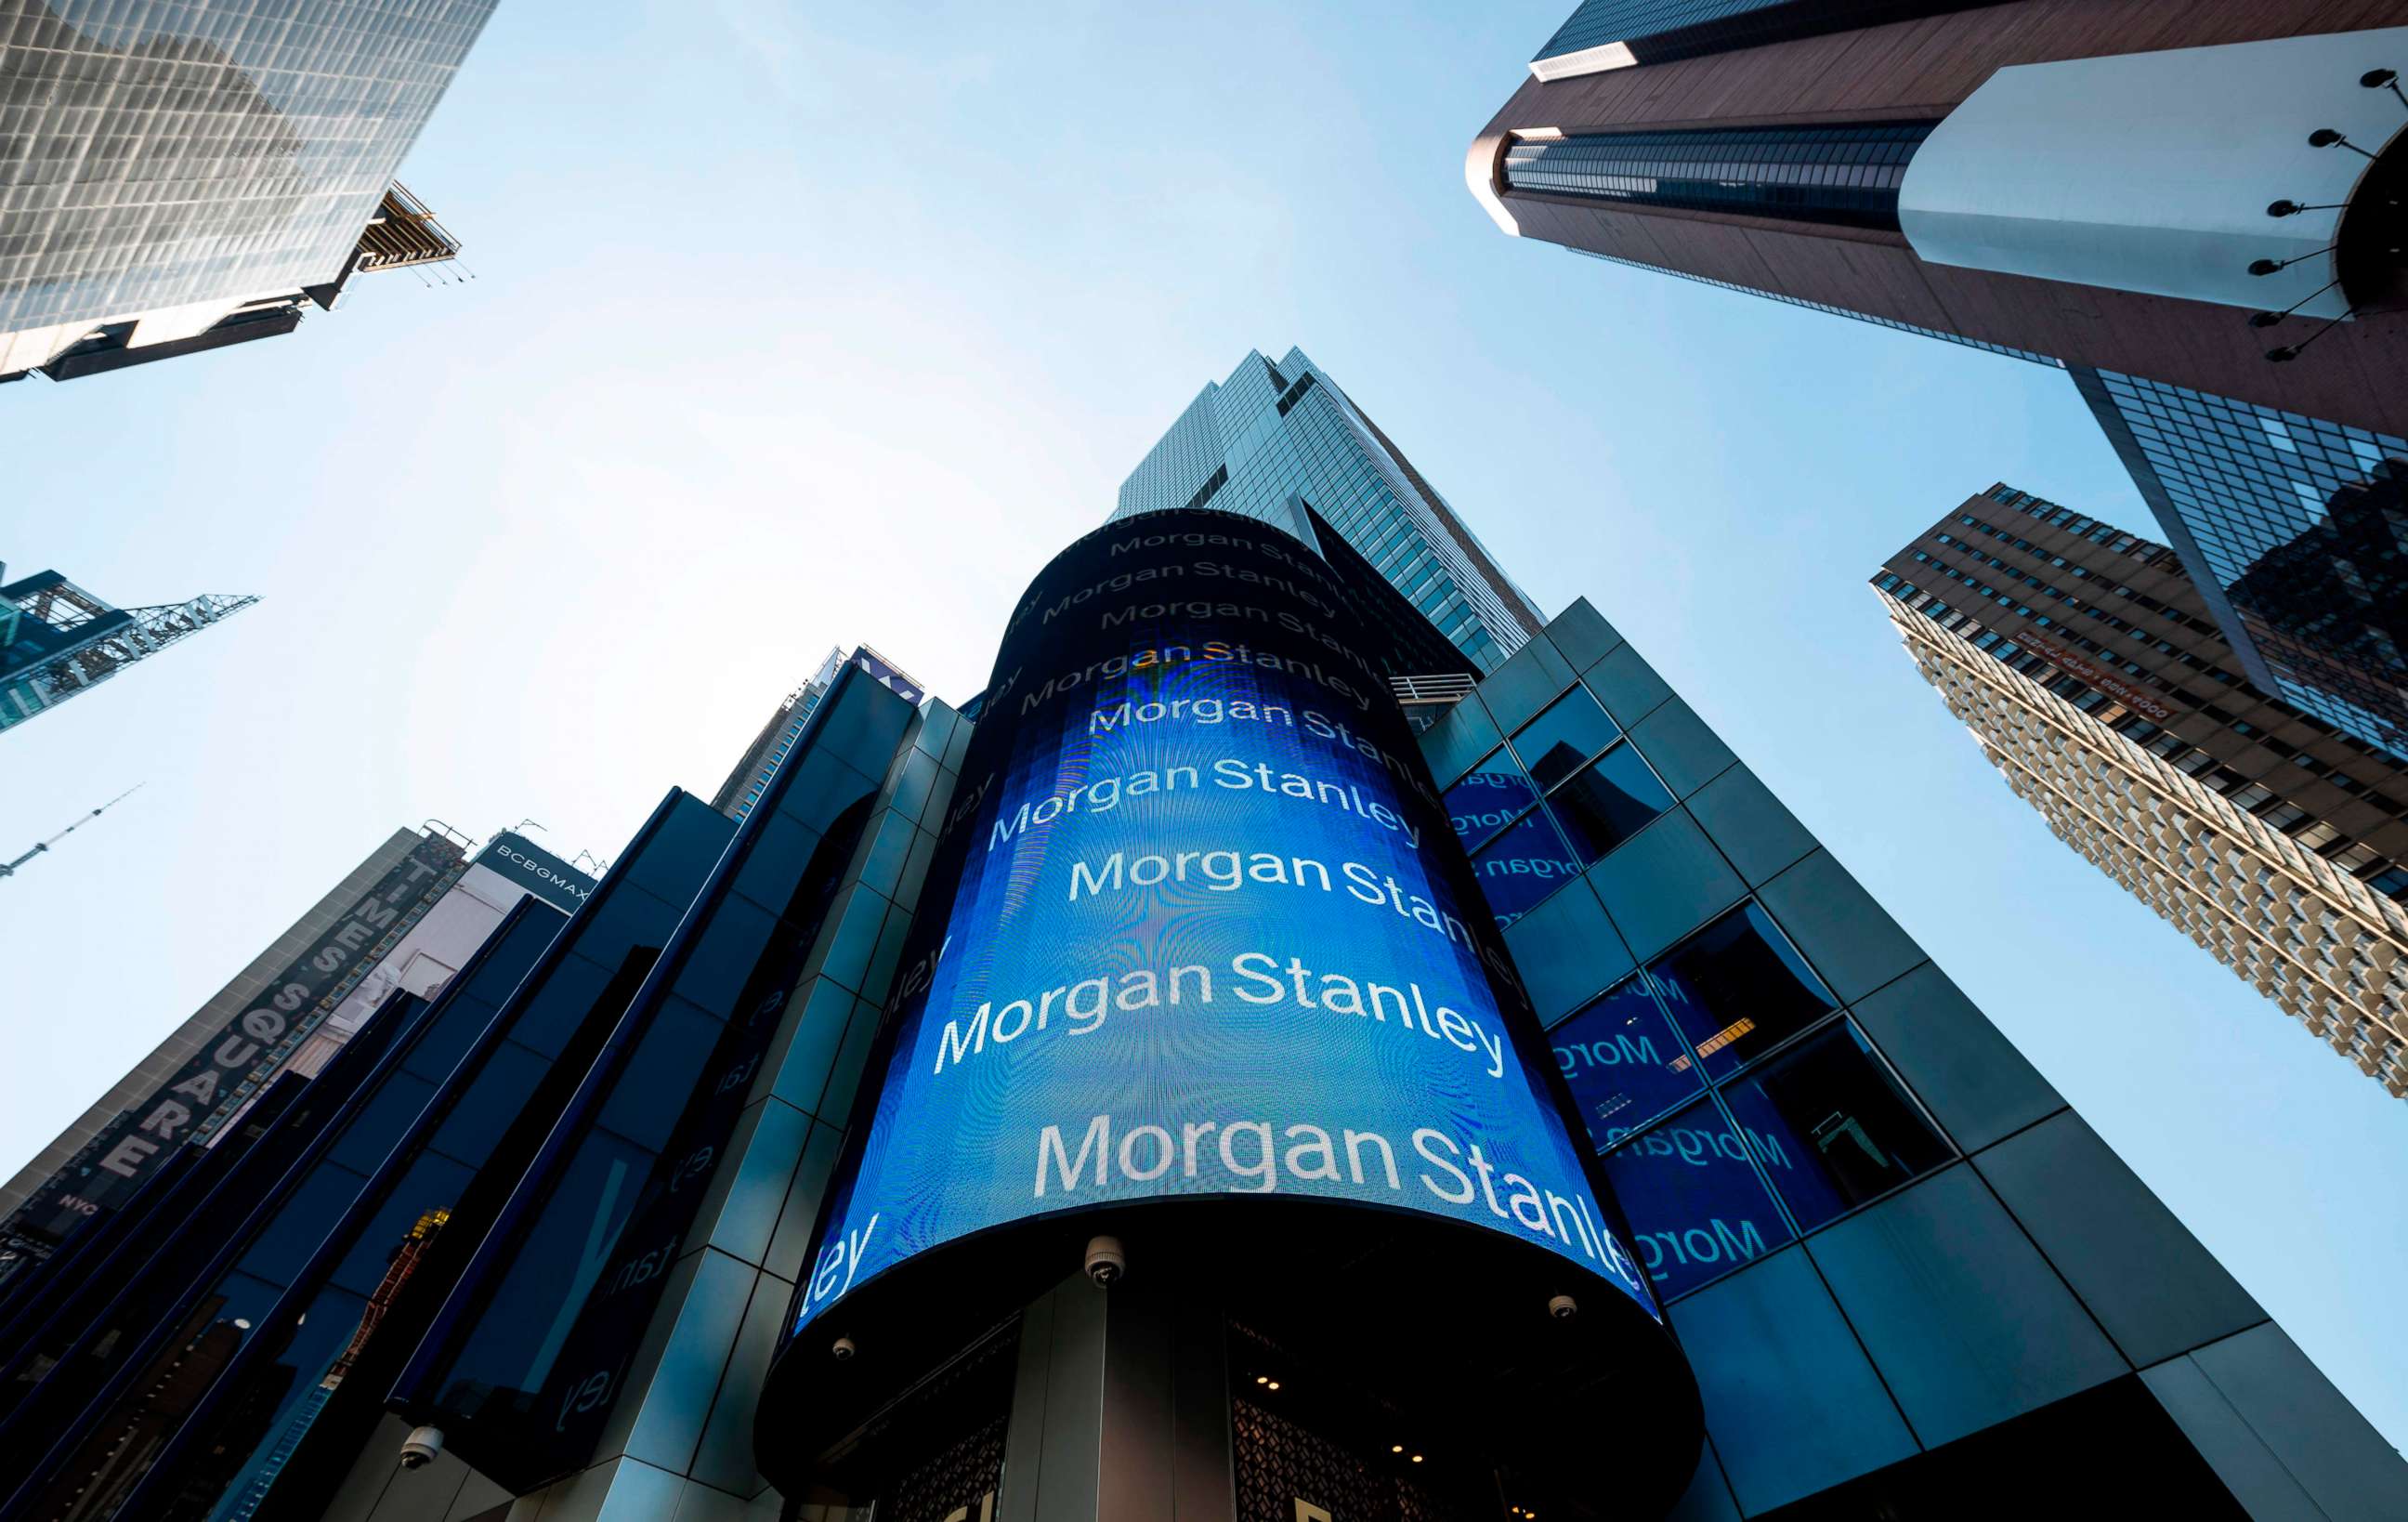 PHOTO: In this file photo taken on April 17, 2019 the Morgan Stanley Global Headquarters are pictured in New York City.